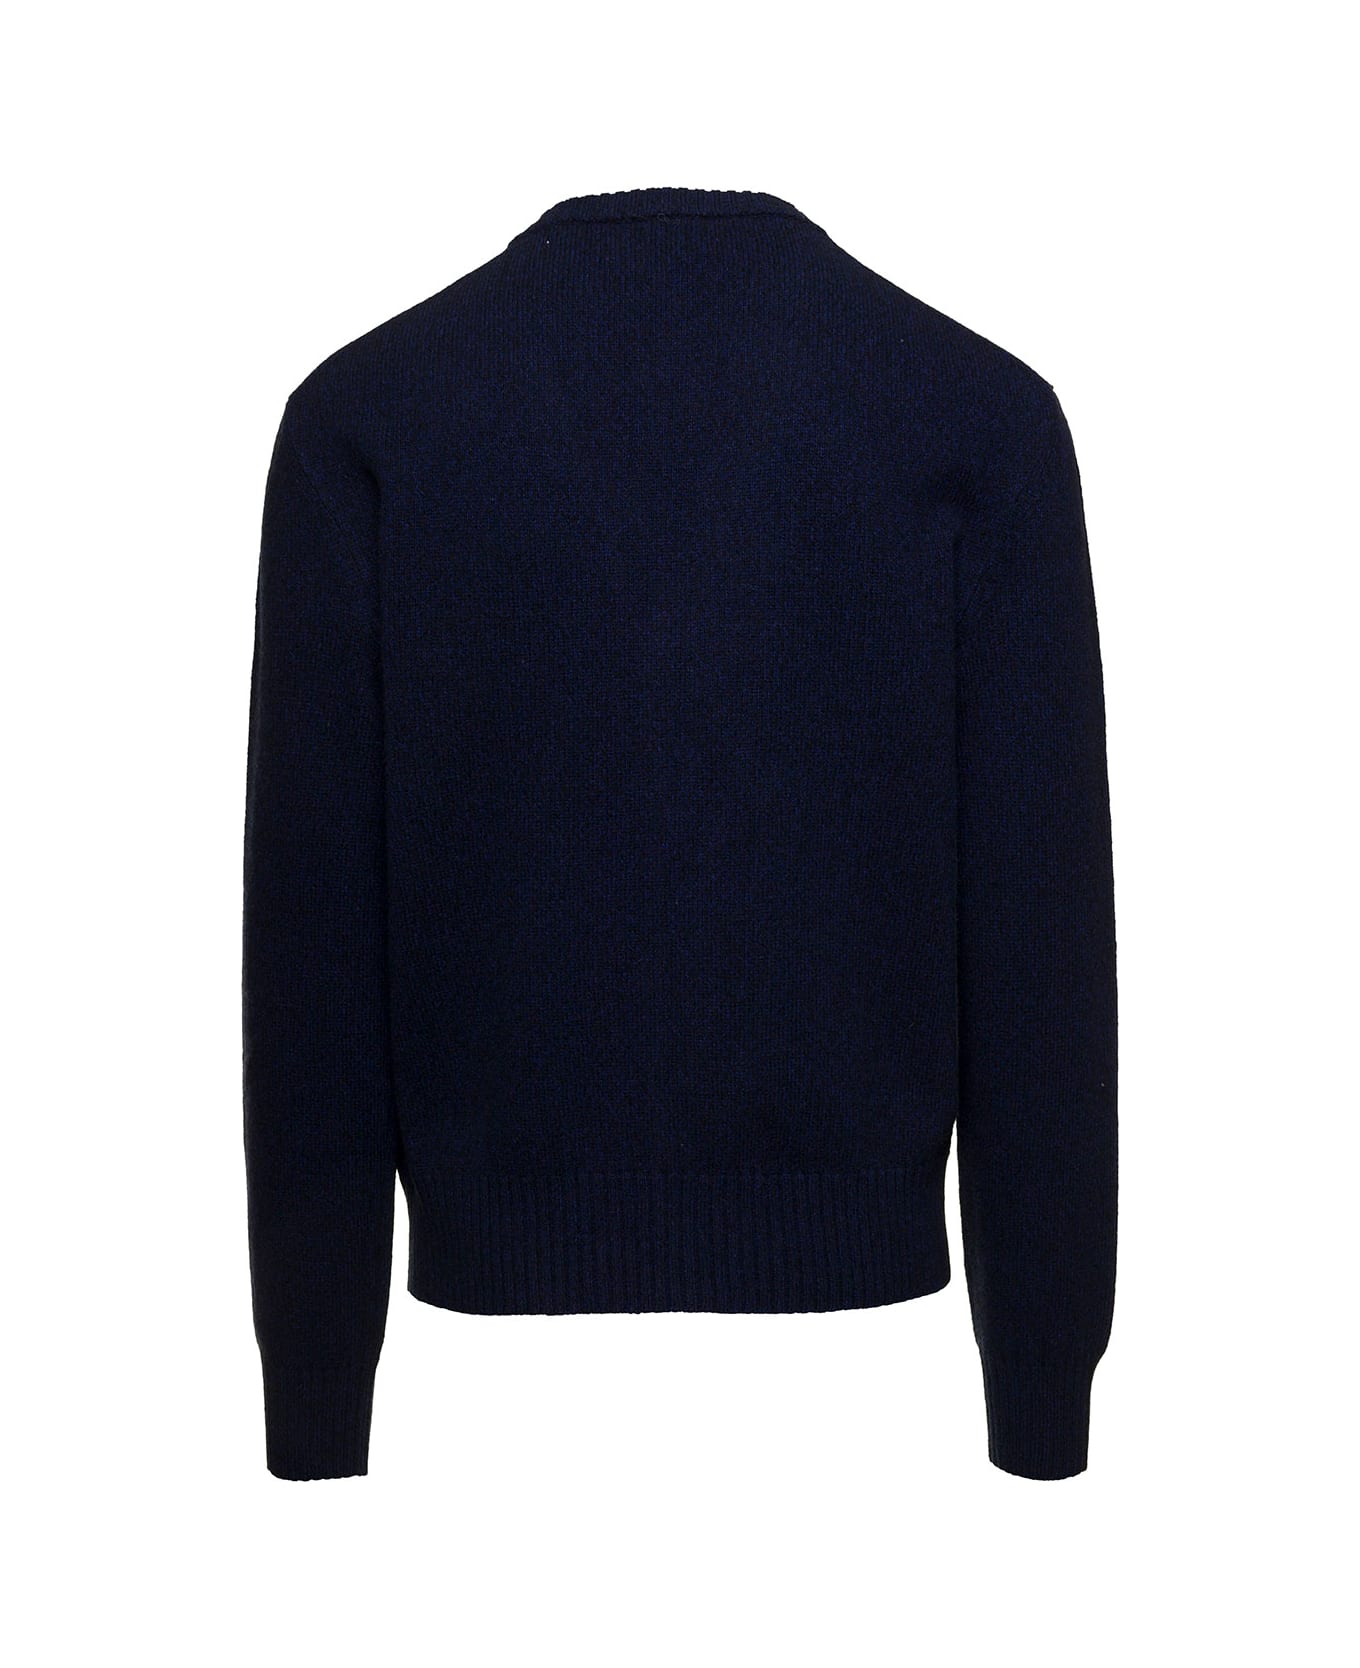 Ami Alexandre Mattiussi Blue Cardigan With Adc Embroidery In Cashmere And Wool Blend Man - Blu